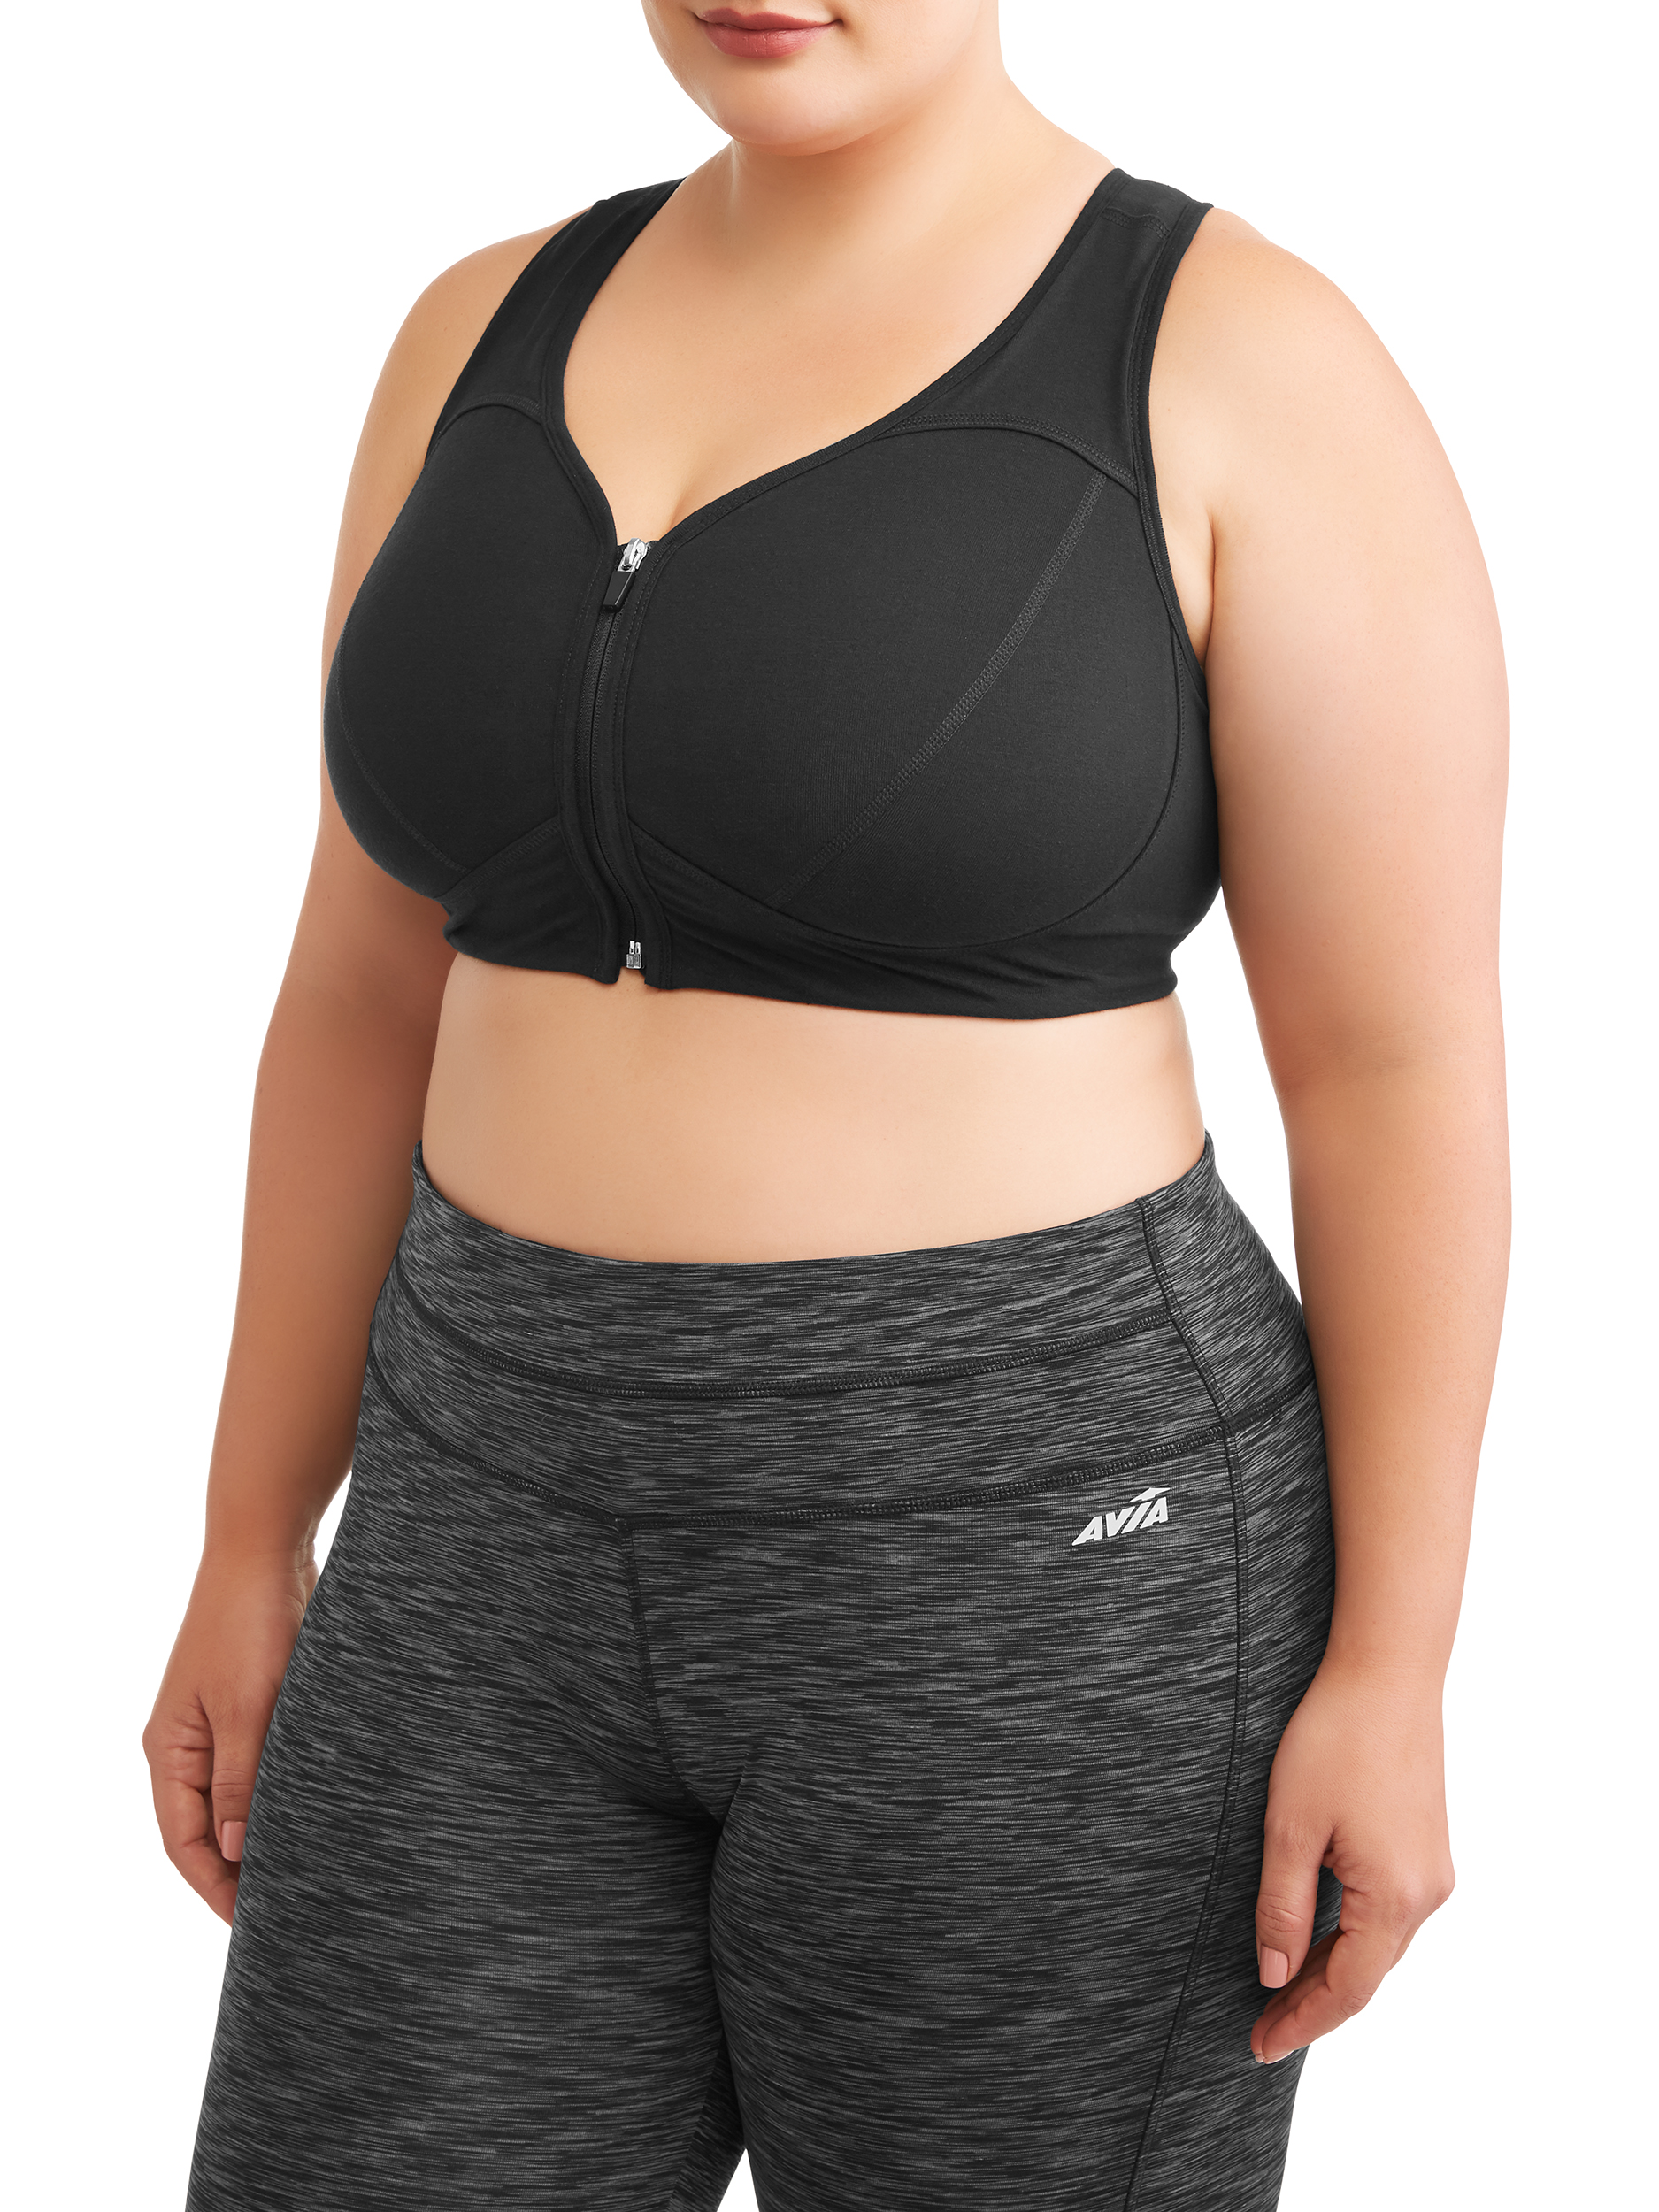 Athletic Works Women's Plus Size Zip Front Sports Bra - image 5 of 5